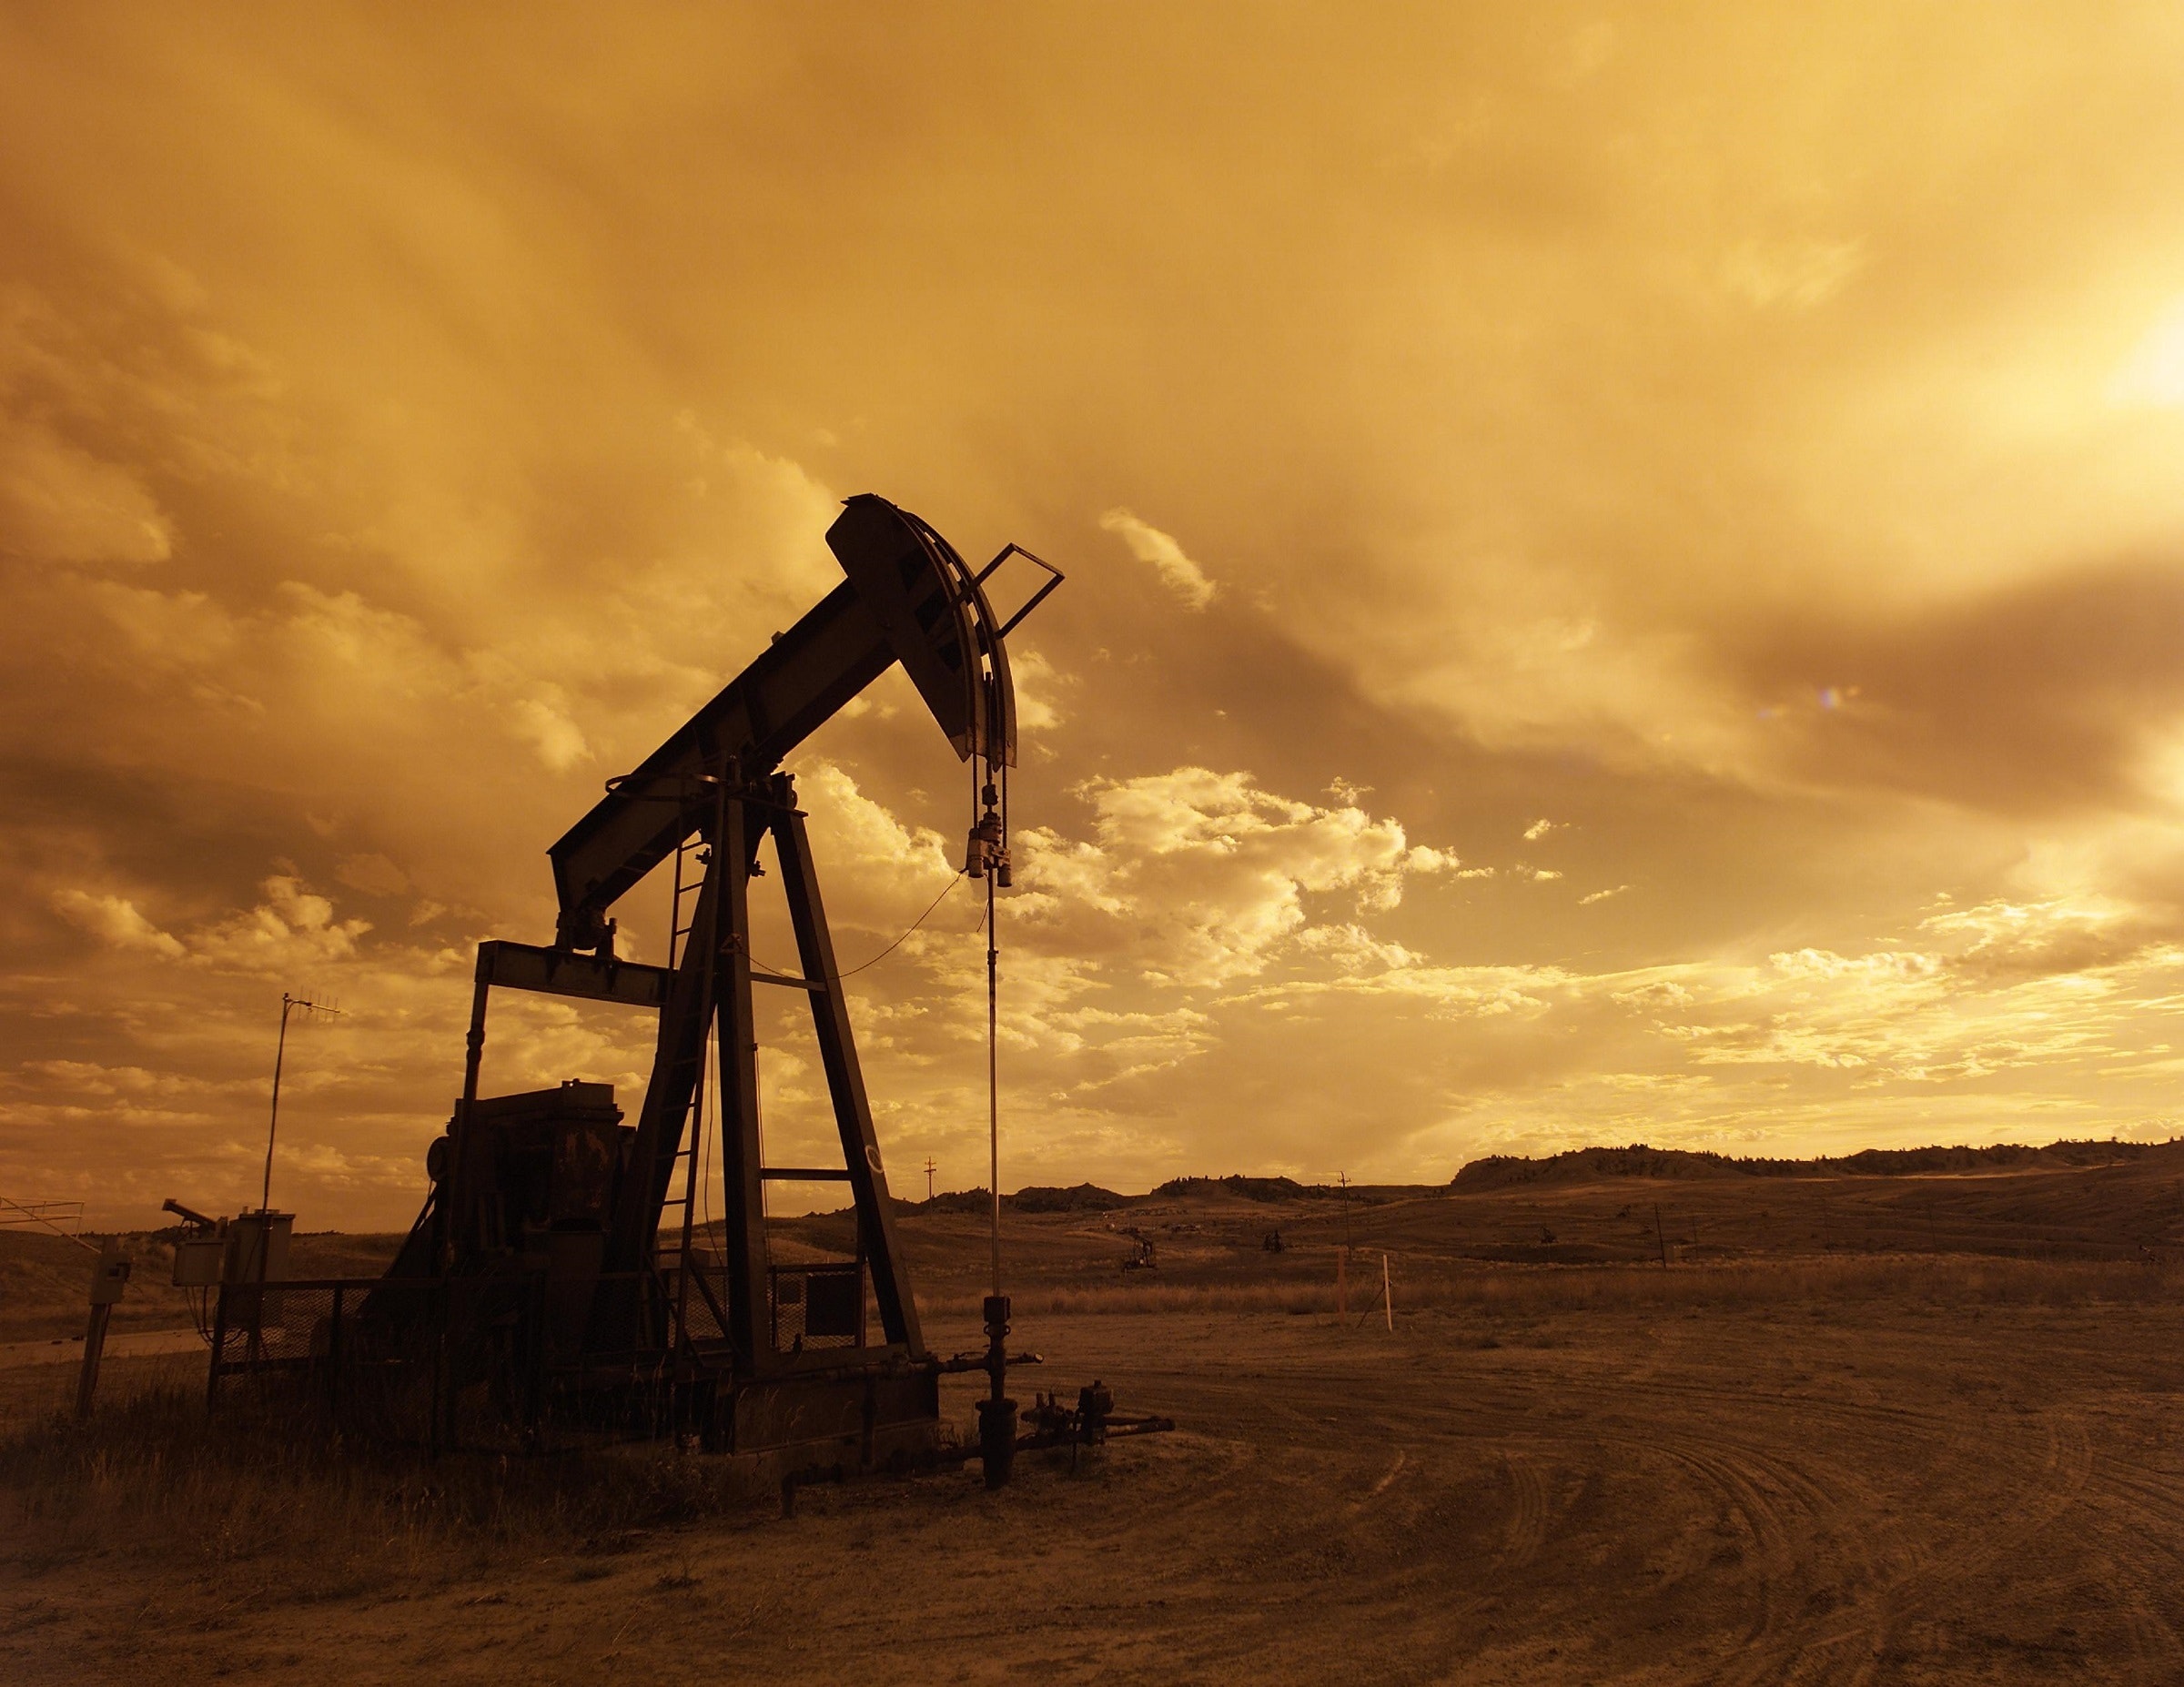 Rising Phoenix a Resource to Mineral Owners During Historic Oil & Gas Lows